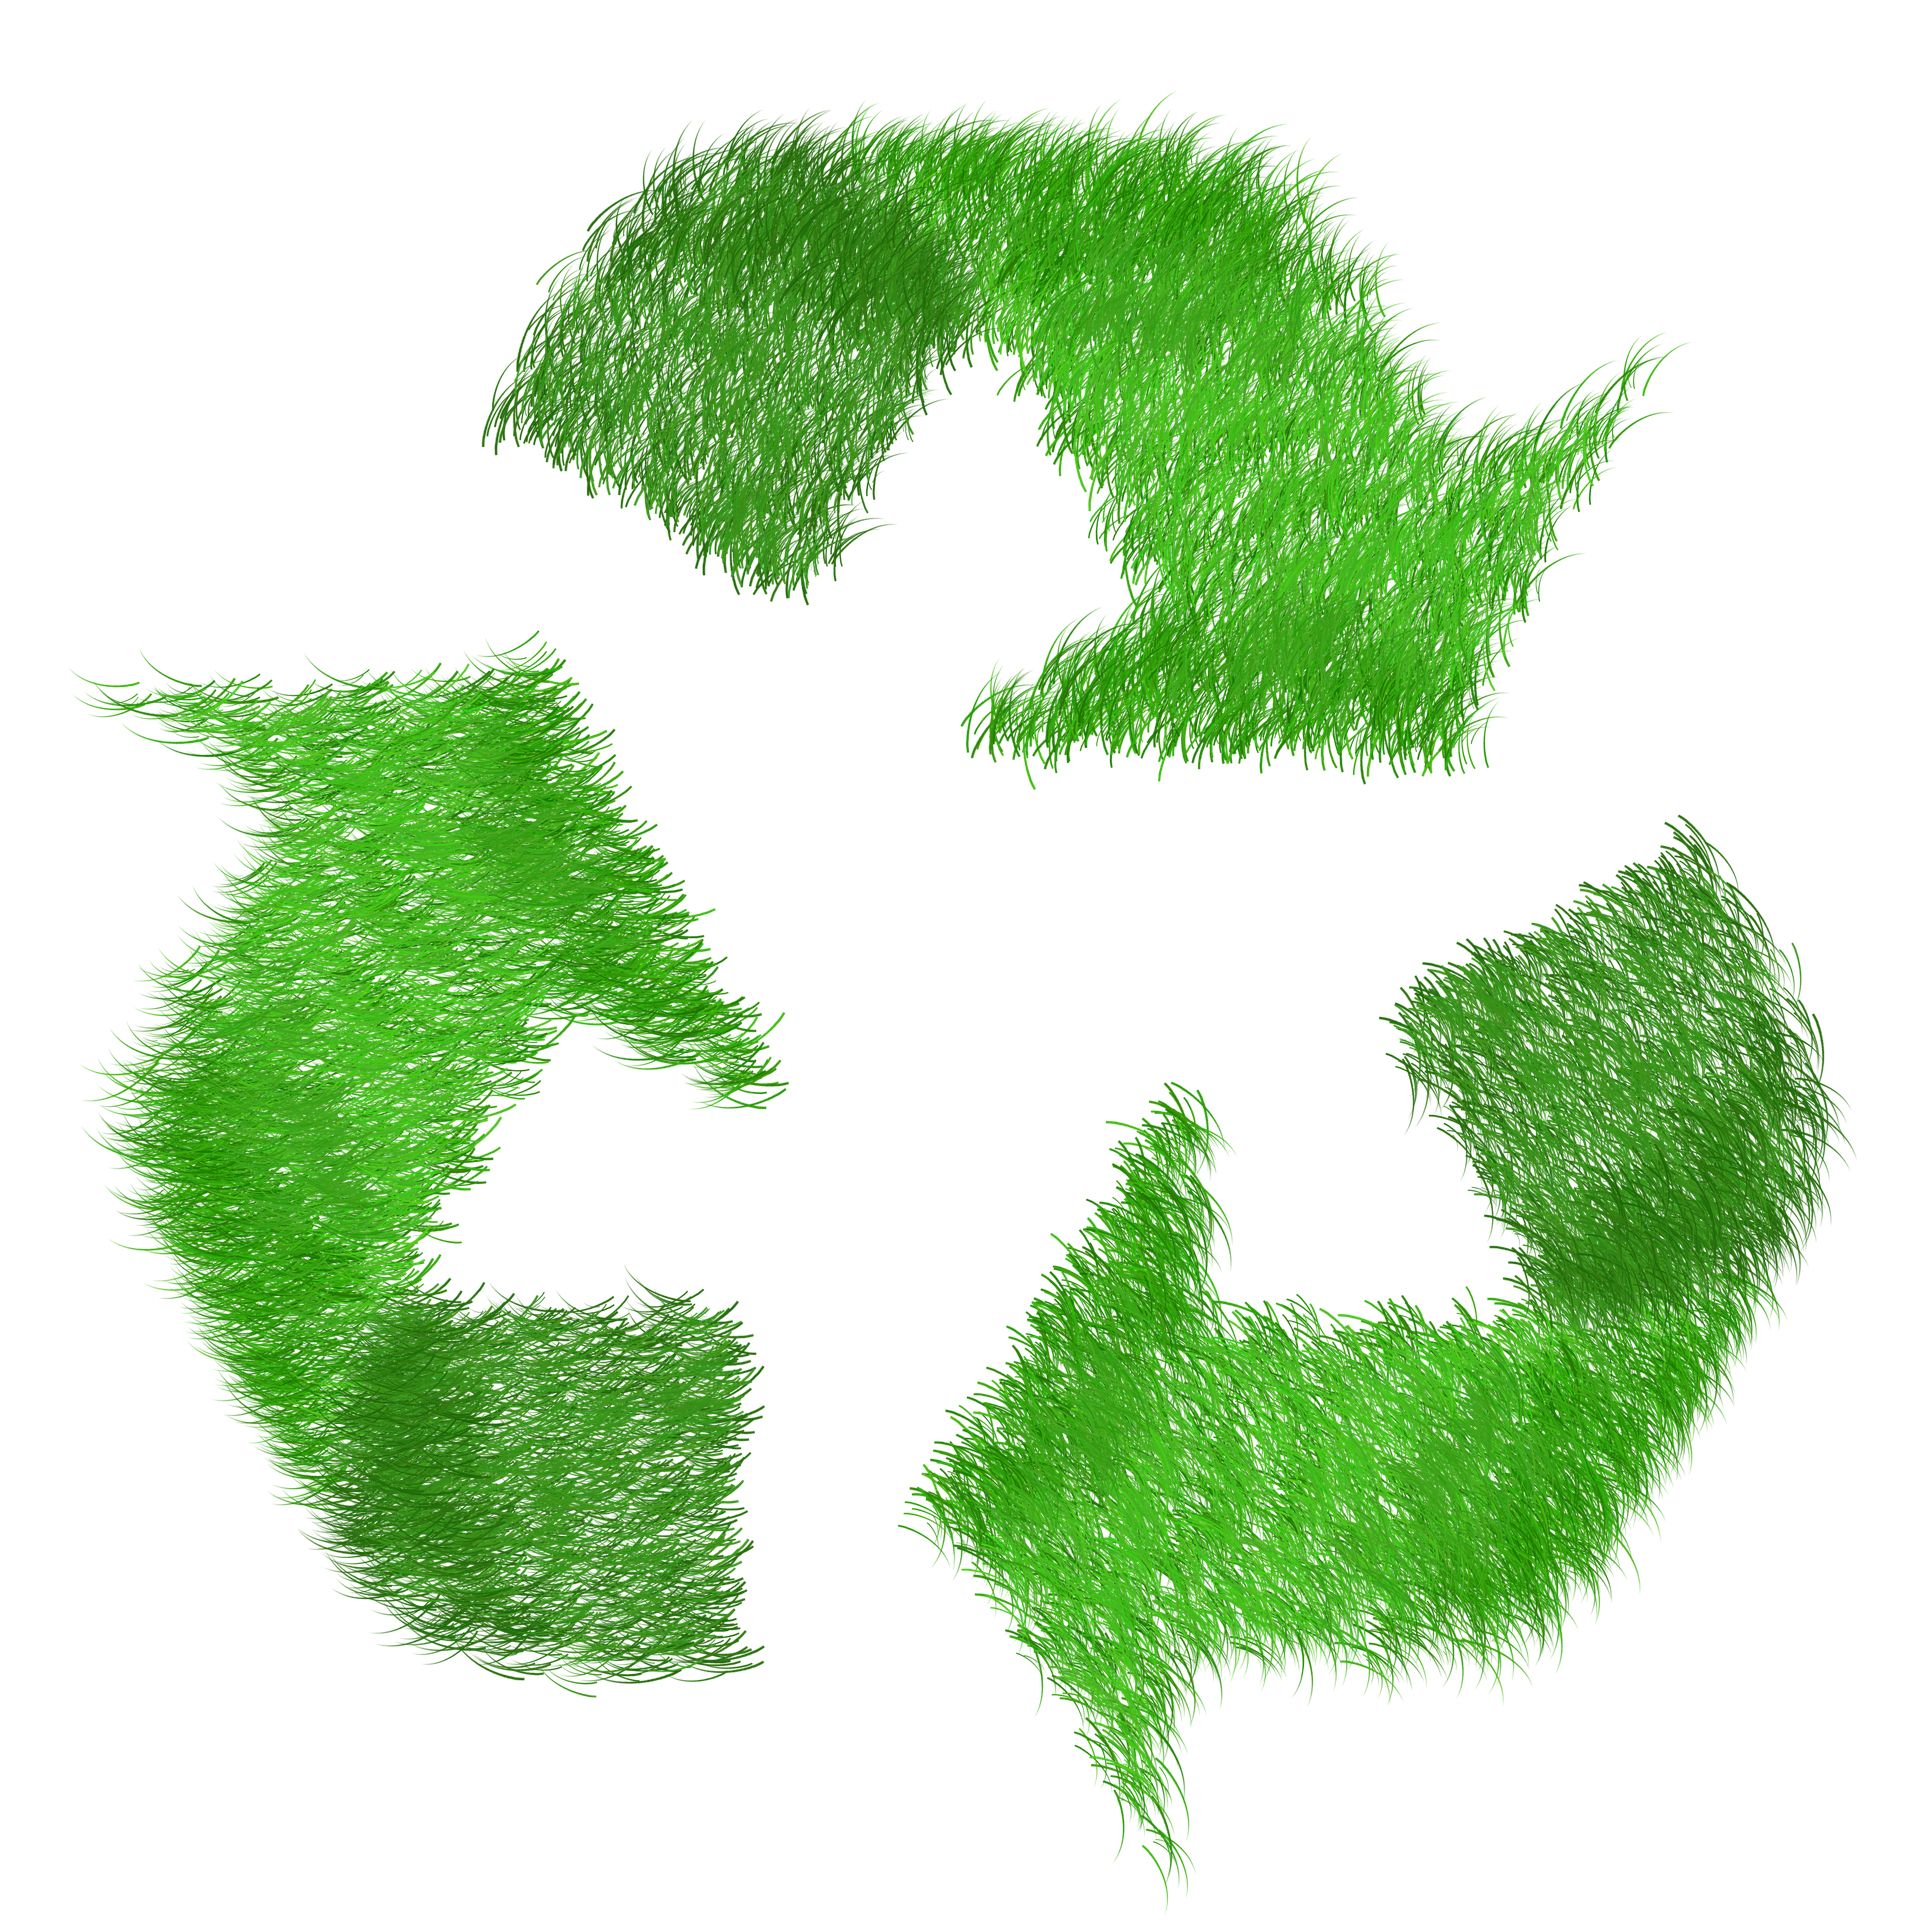 Importance of Recycling